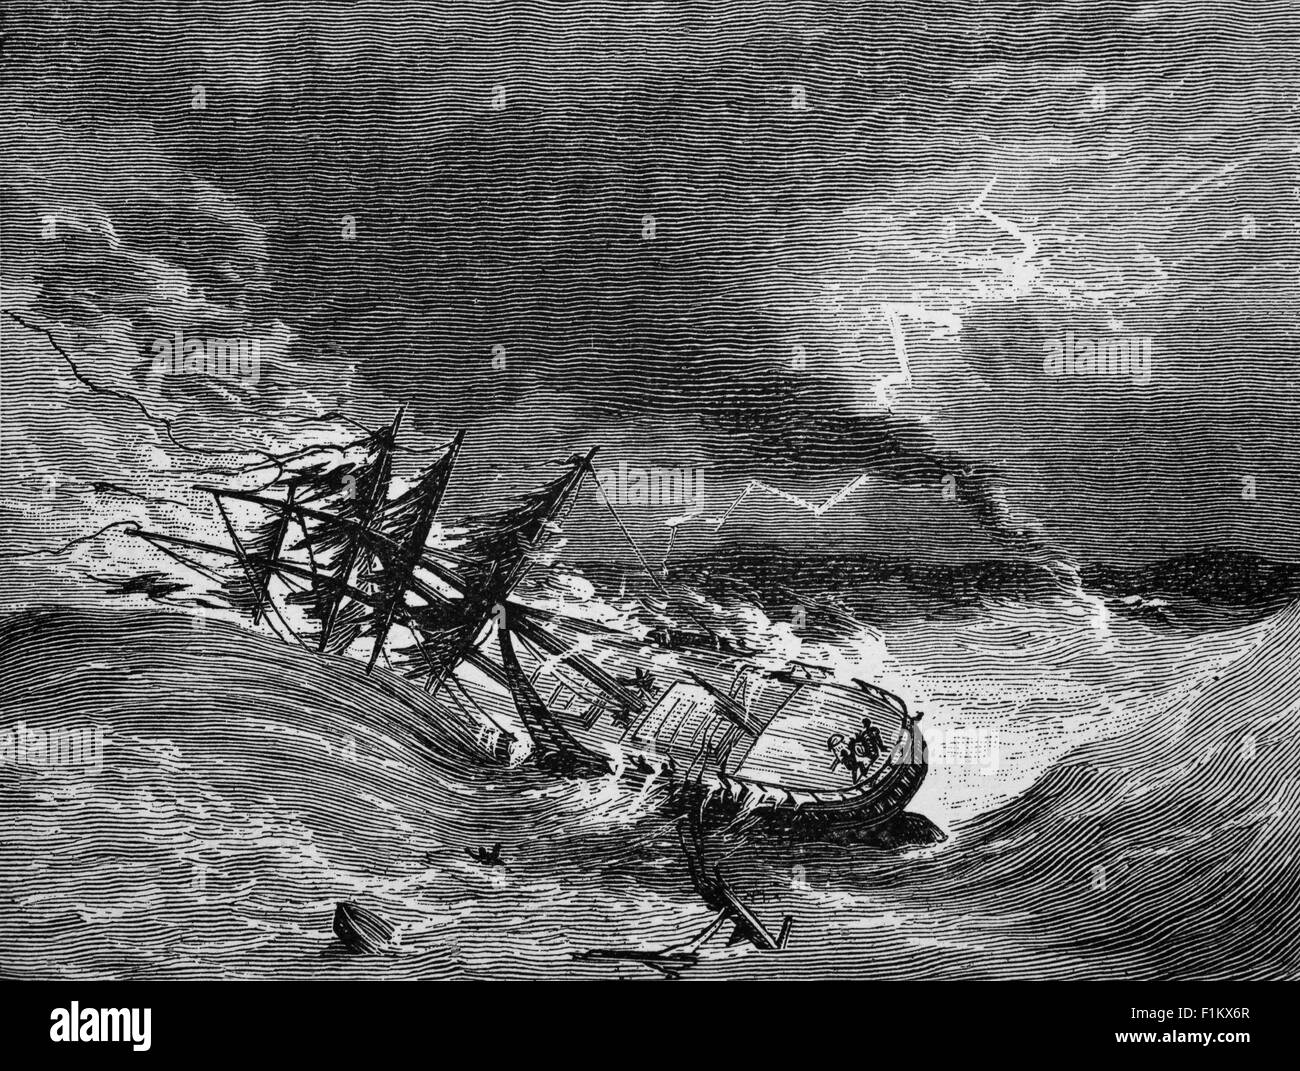 A 19th Century sailing ship in distress, from high storm waves in the Atlantic Ocean Stock Photo